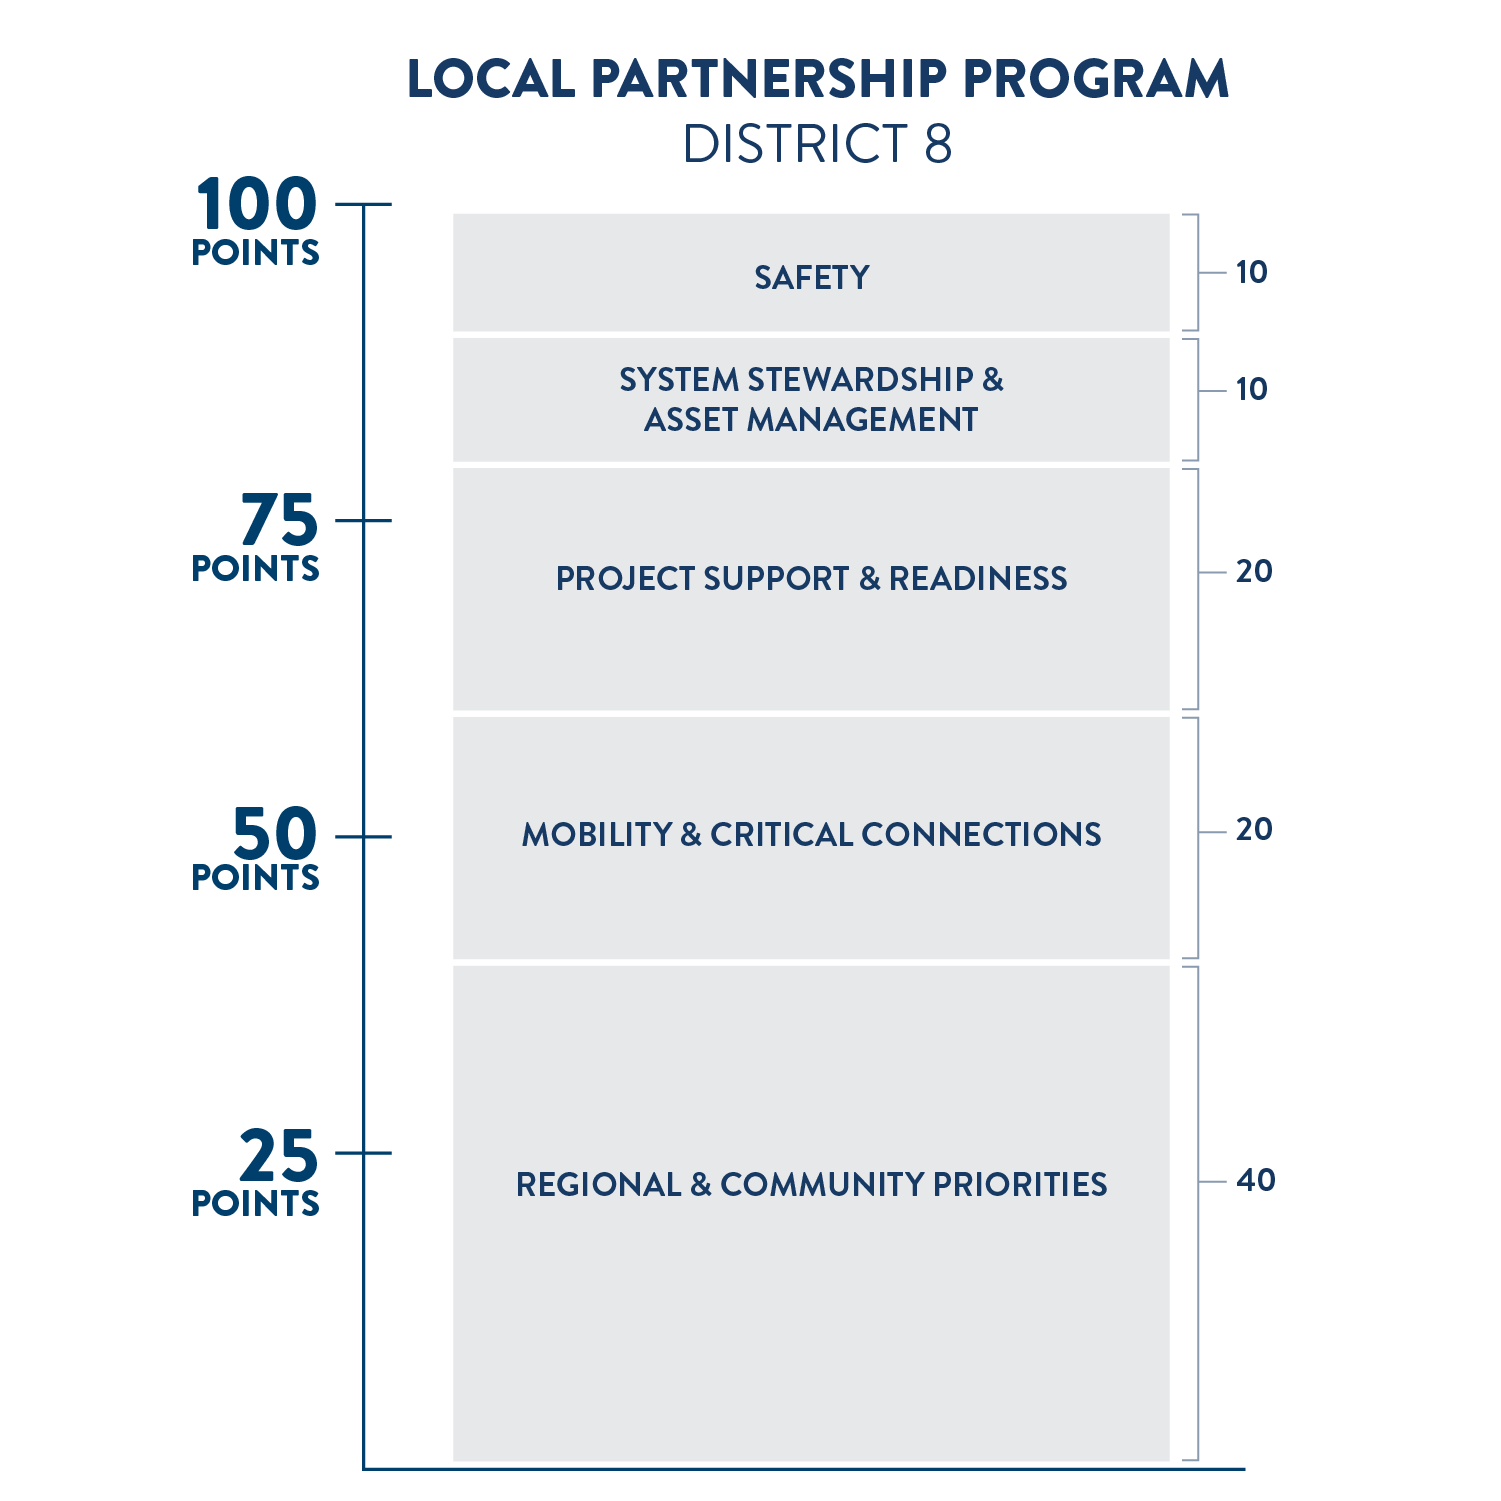 Scoring criteria for the local partnership program in district 8. Out of 100 possible points, 40 points are based on regional and community priorities, 20 points are based on mobility and critical connections, 20 points are based on project support and readiness, 10 points are based on system stewardship and asset management, and 10 points are based on safety.